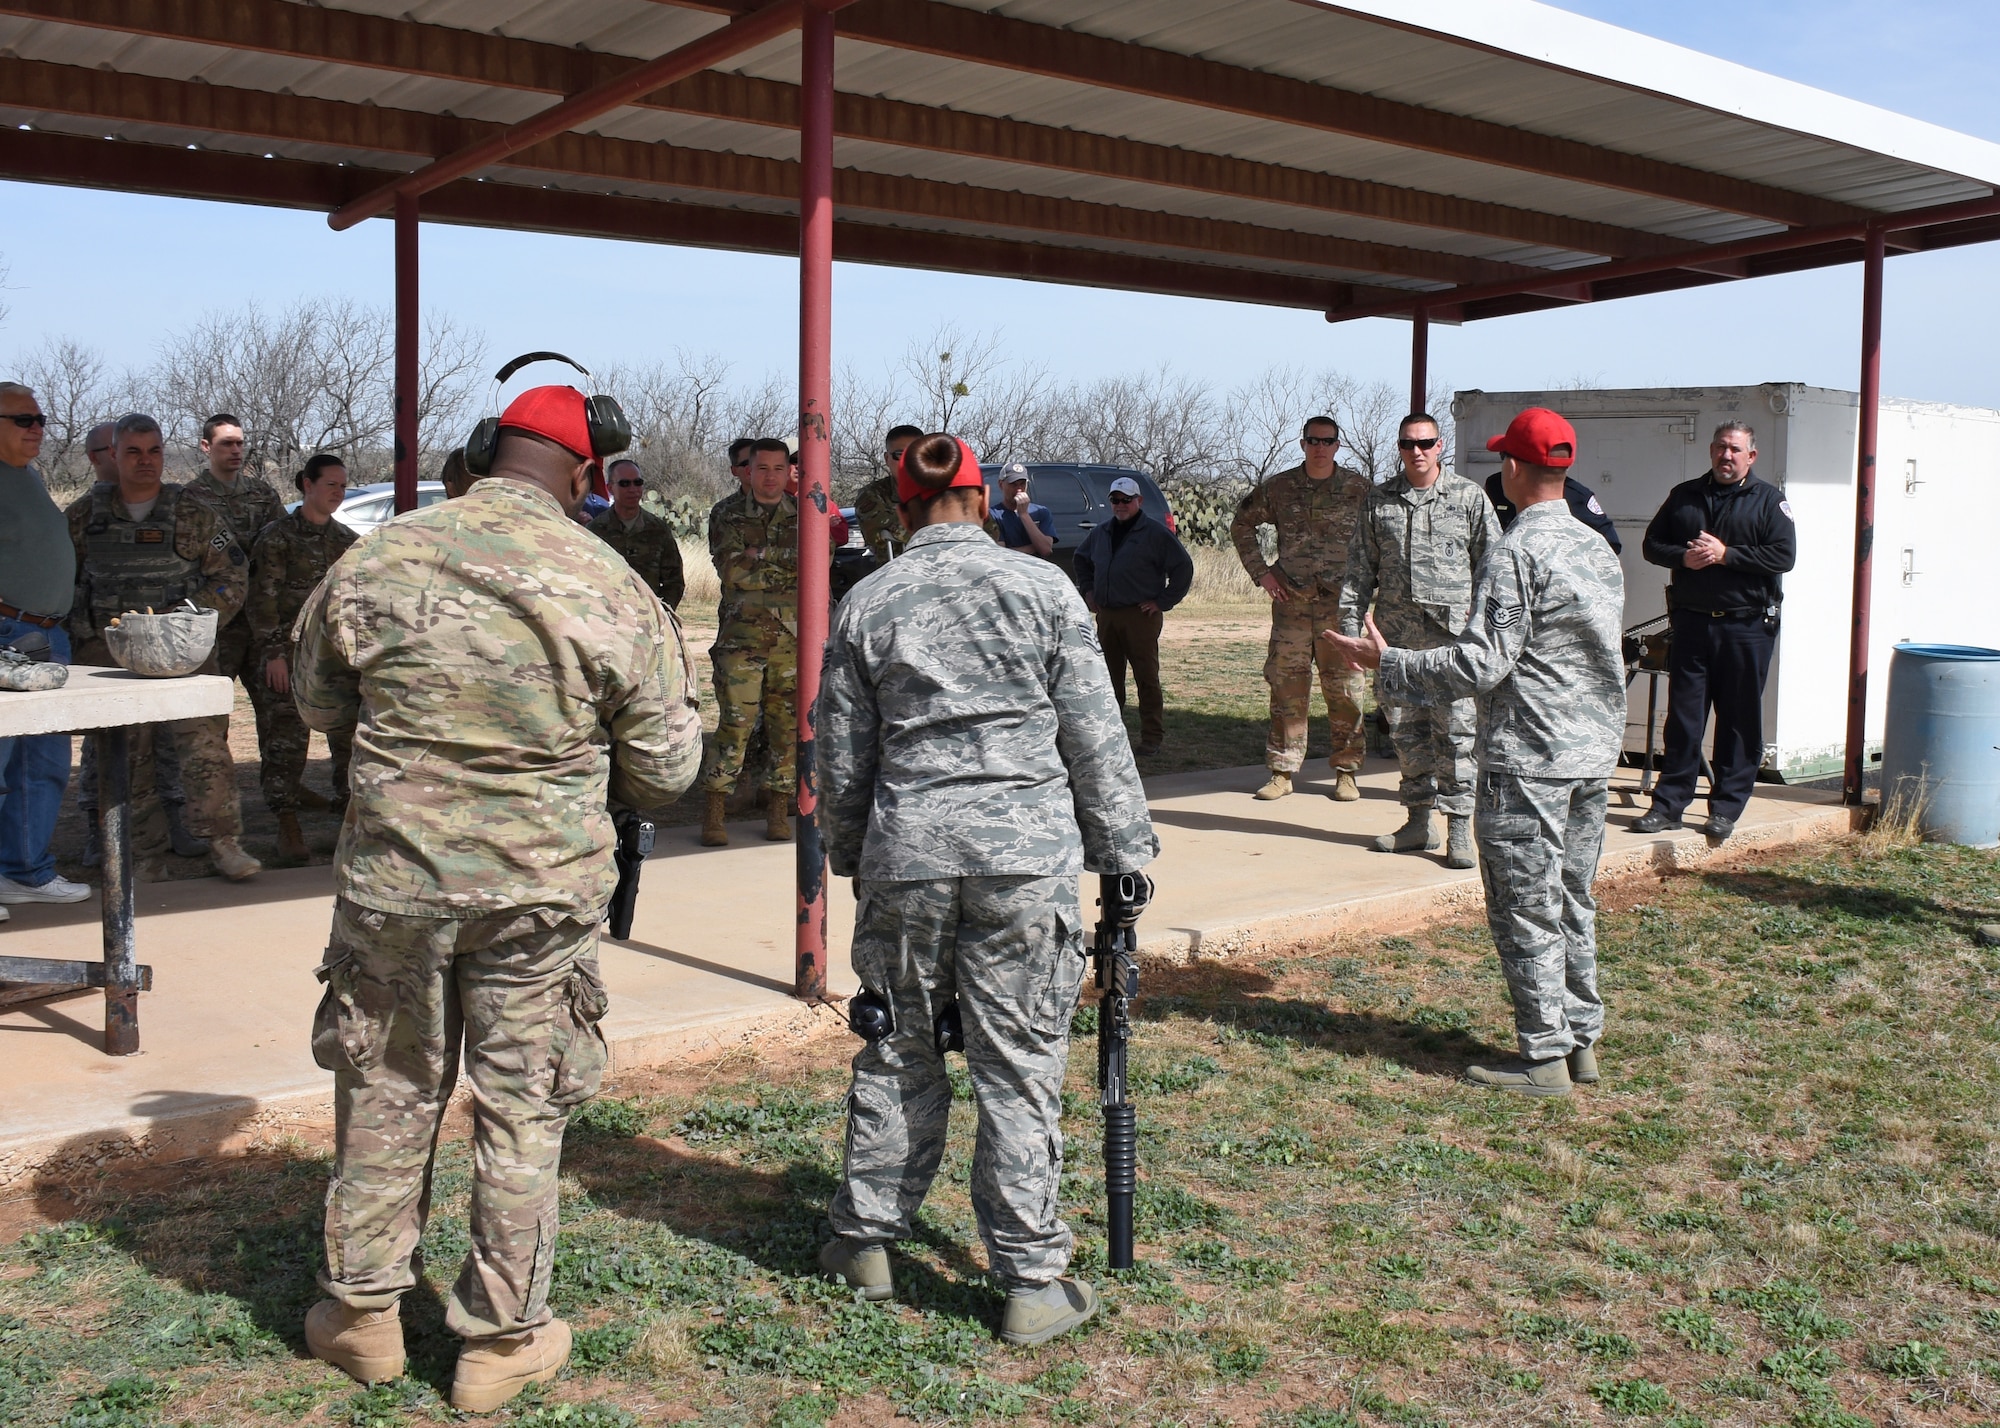 Members of the combat arms team, part of the 17th Security Forces Squadron, give a safety brief before firing the M203 and M320 grenade launchers at the San Angelo Police Department firing range,Texas, Feb. 15, 2019. Goodfellow members had the chance to fire both weapons to see firsthand the difference and improvements in the M320. (U.S. Air Force photo by Airman 1st Class Zachary Chapman/Released)